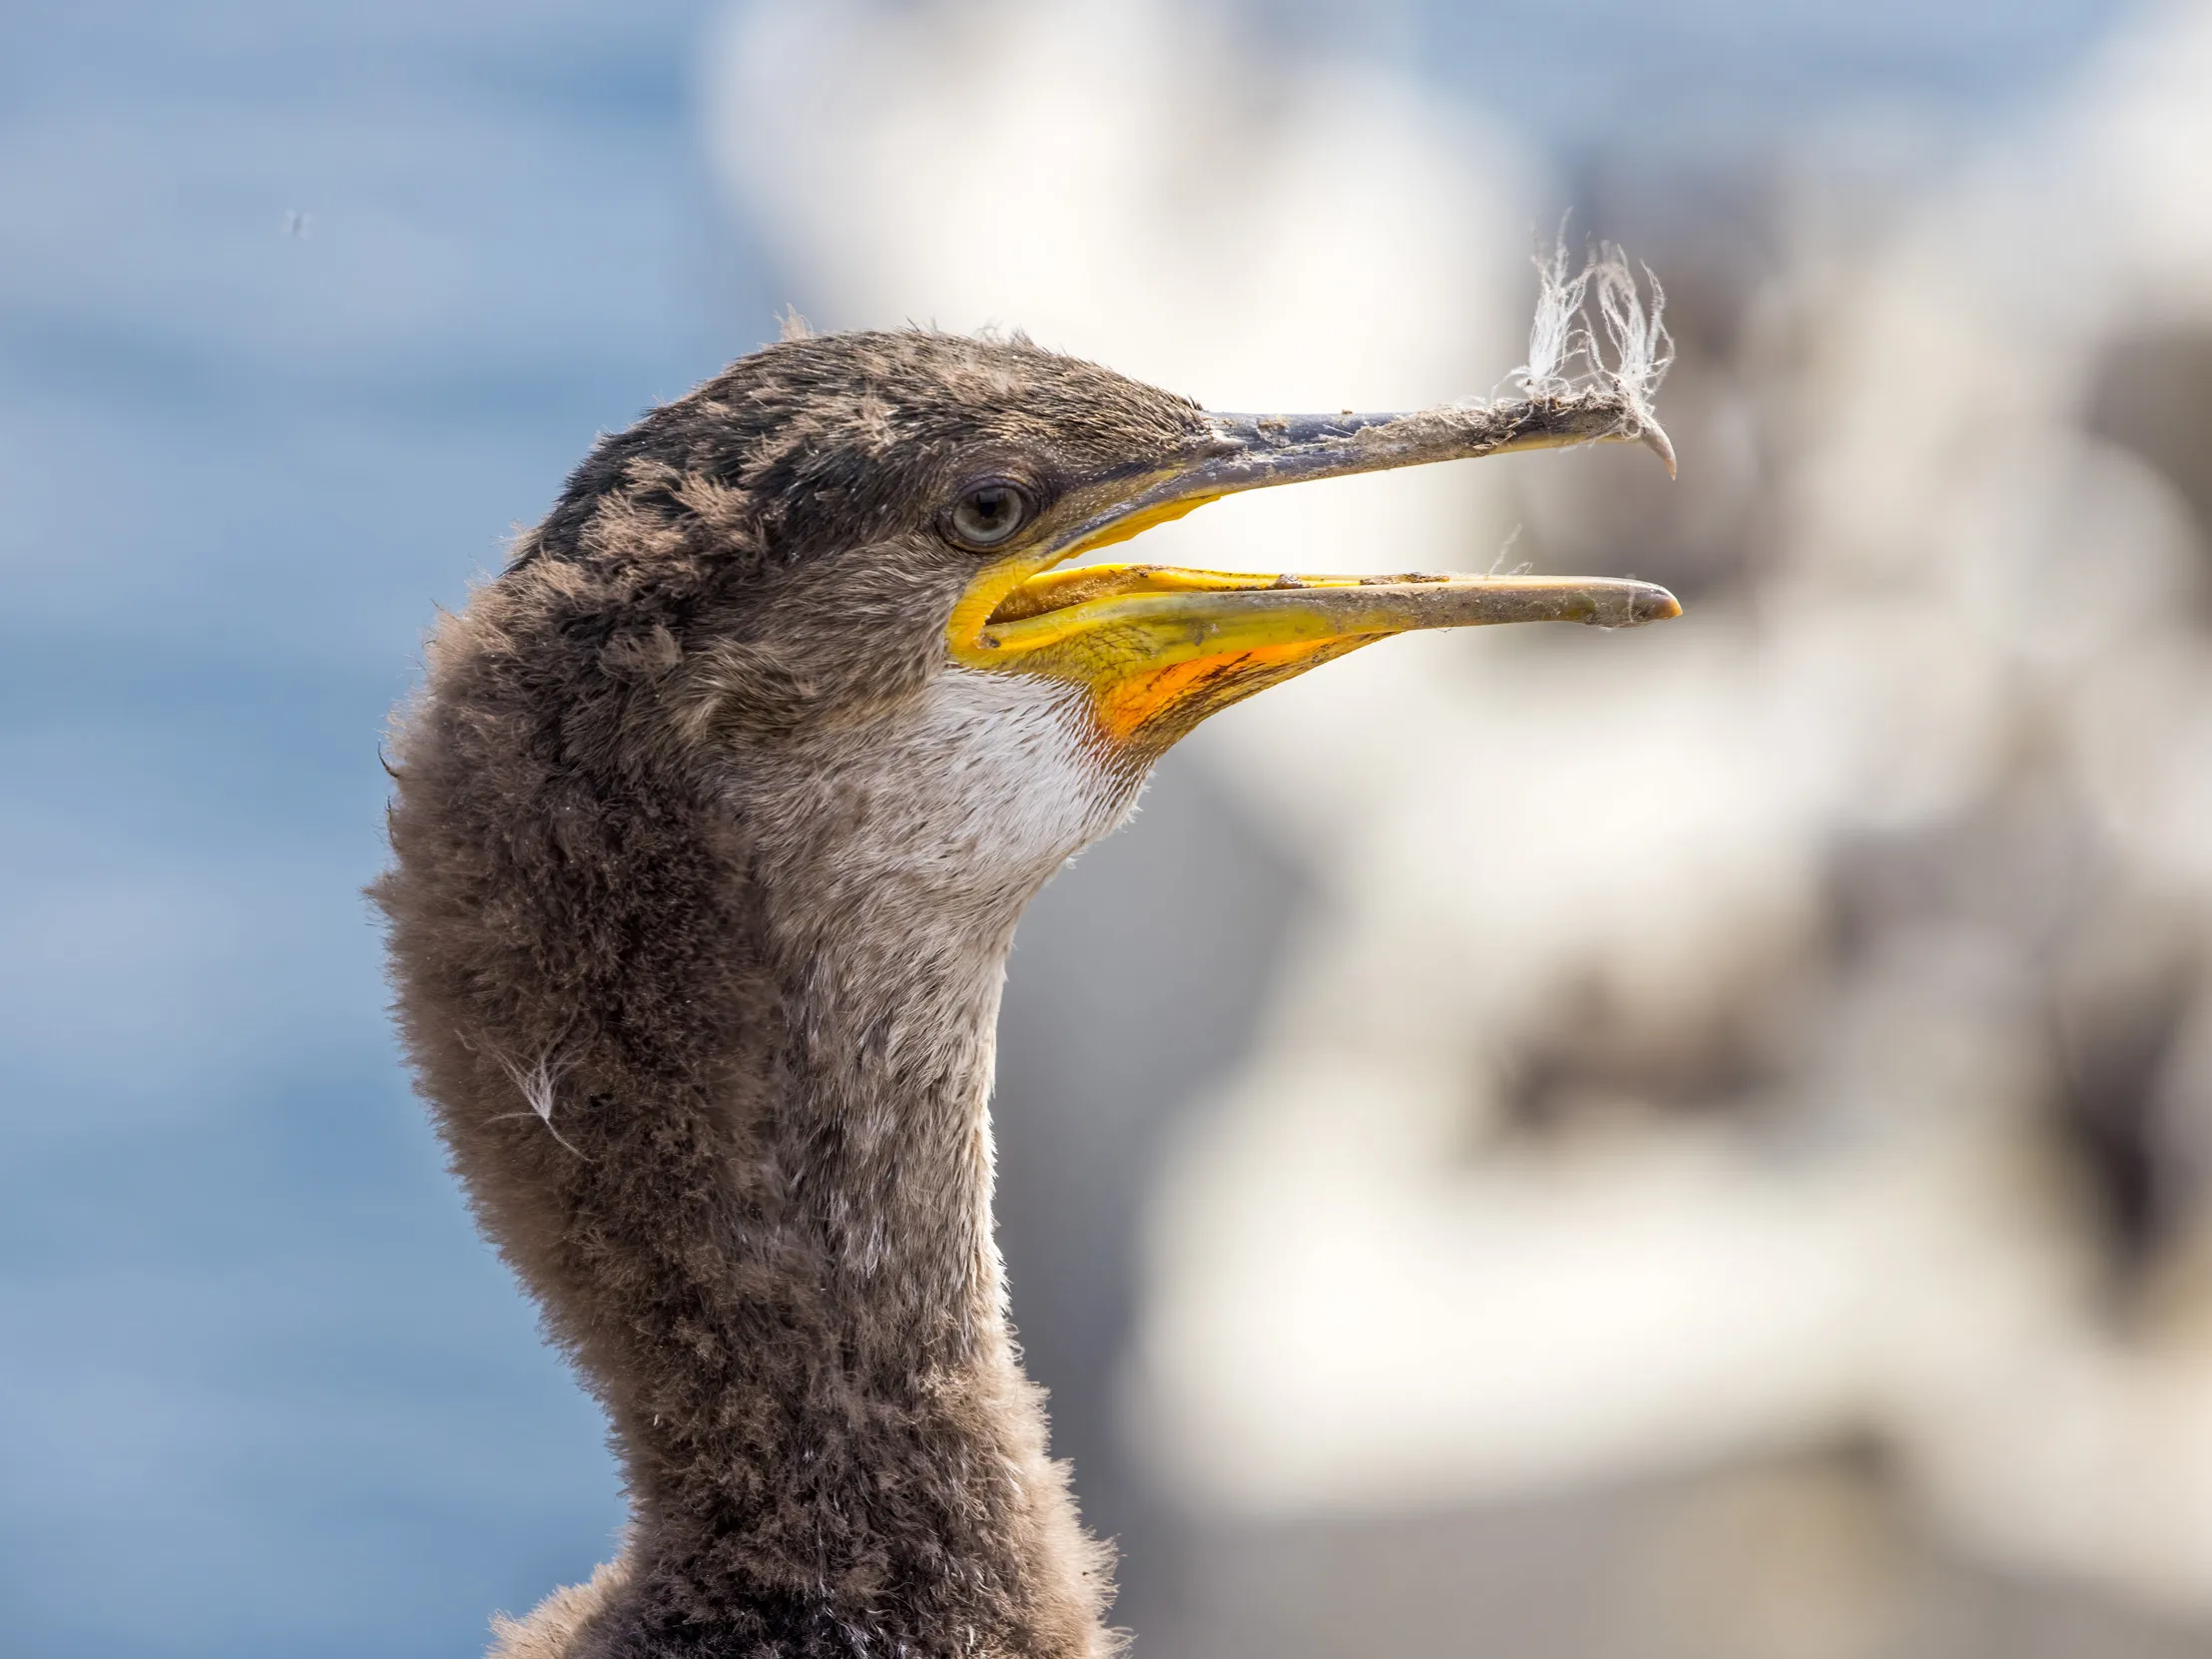 Close up view of a juvenile Shag with their beak open.